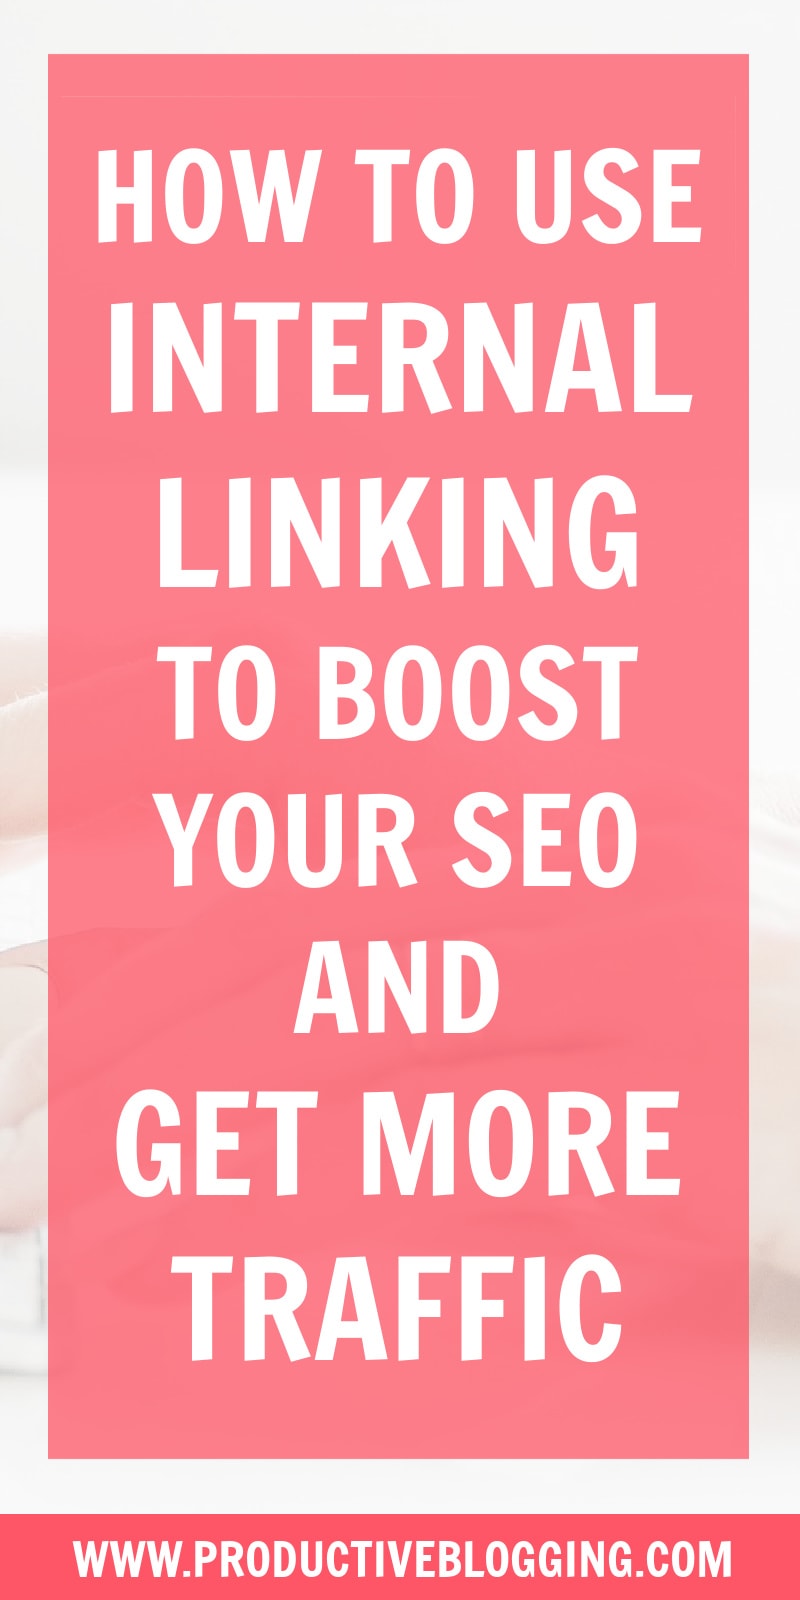 Internal linking is a powerful, yet often overlooked SEO tactic. When internal linking is done well it can provide a significant traffic boost, as well as enhance your websites user experience. Here’s how to boost your SEO with internal linking… #internallinking #internallinks #SEO #SEOtips #SEOhacks #searchengineoptimization #SEOforbloggers #SEOforbeginners #beginnersSEO #growyourblog #bloggrowth #bloggingtips #blogtips #blogging #bloggers #productivity #productivitytips #productiveblogging